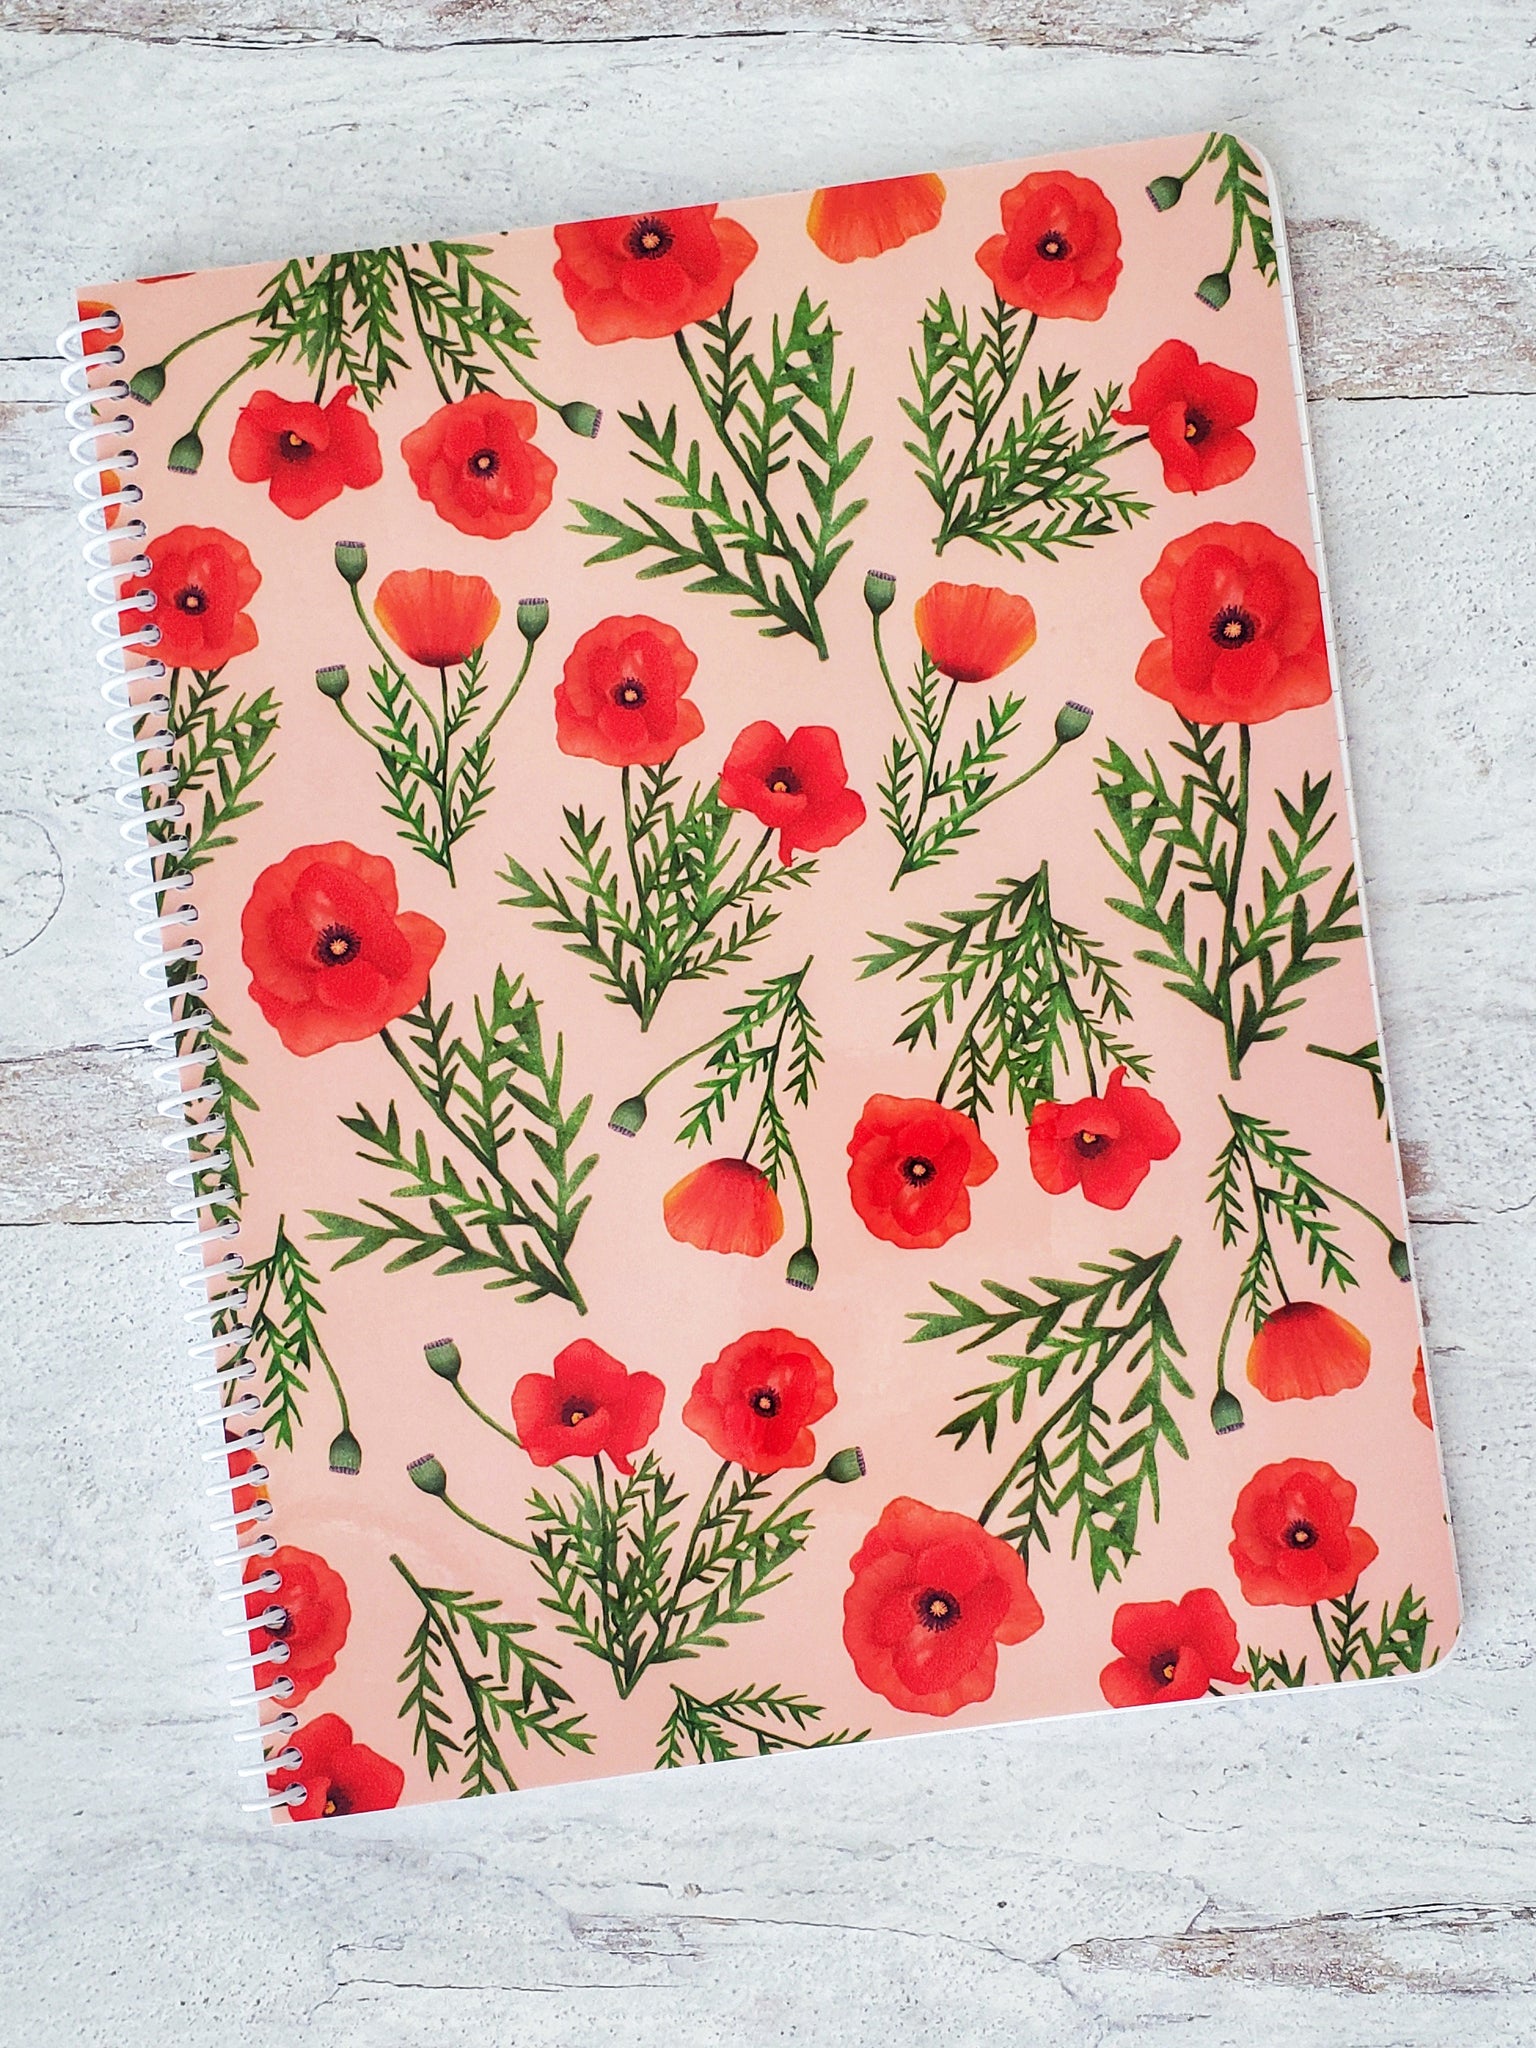 spiral notebook with light pink background and illustrated red poppies pattern on cover